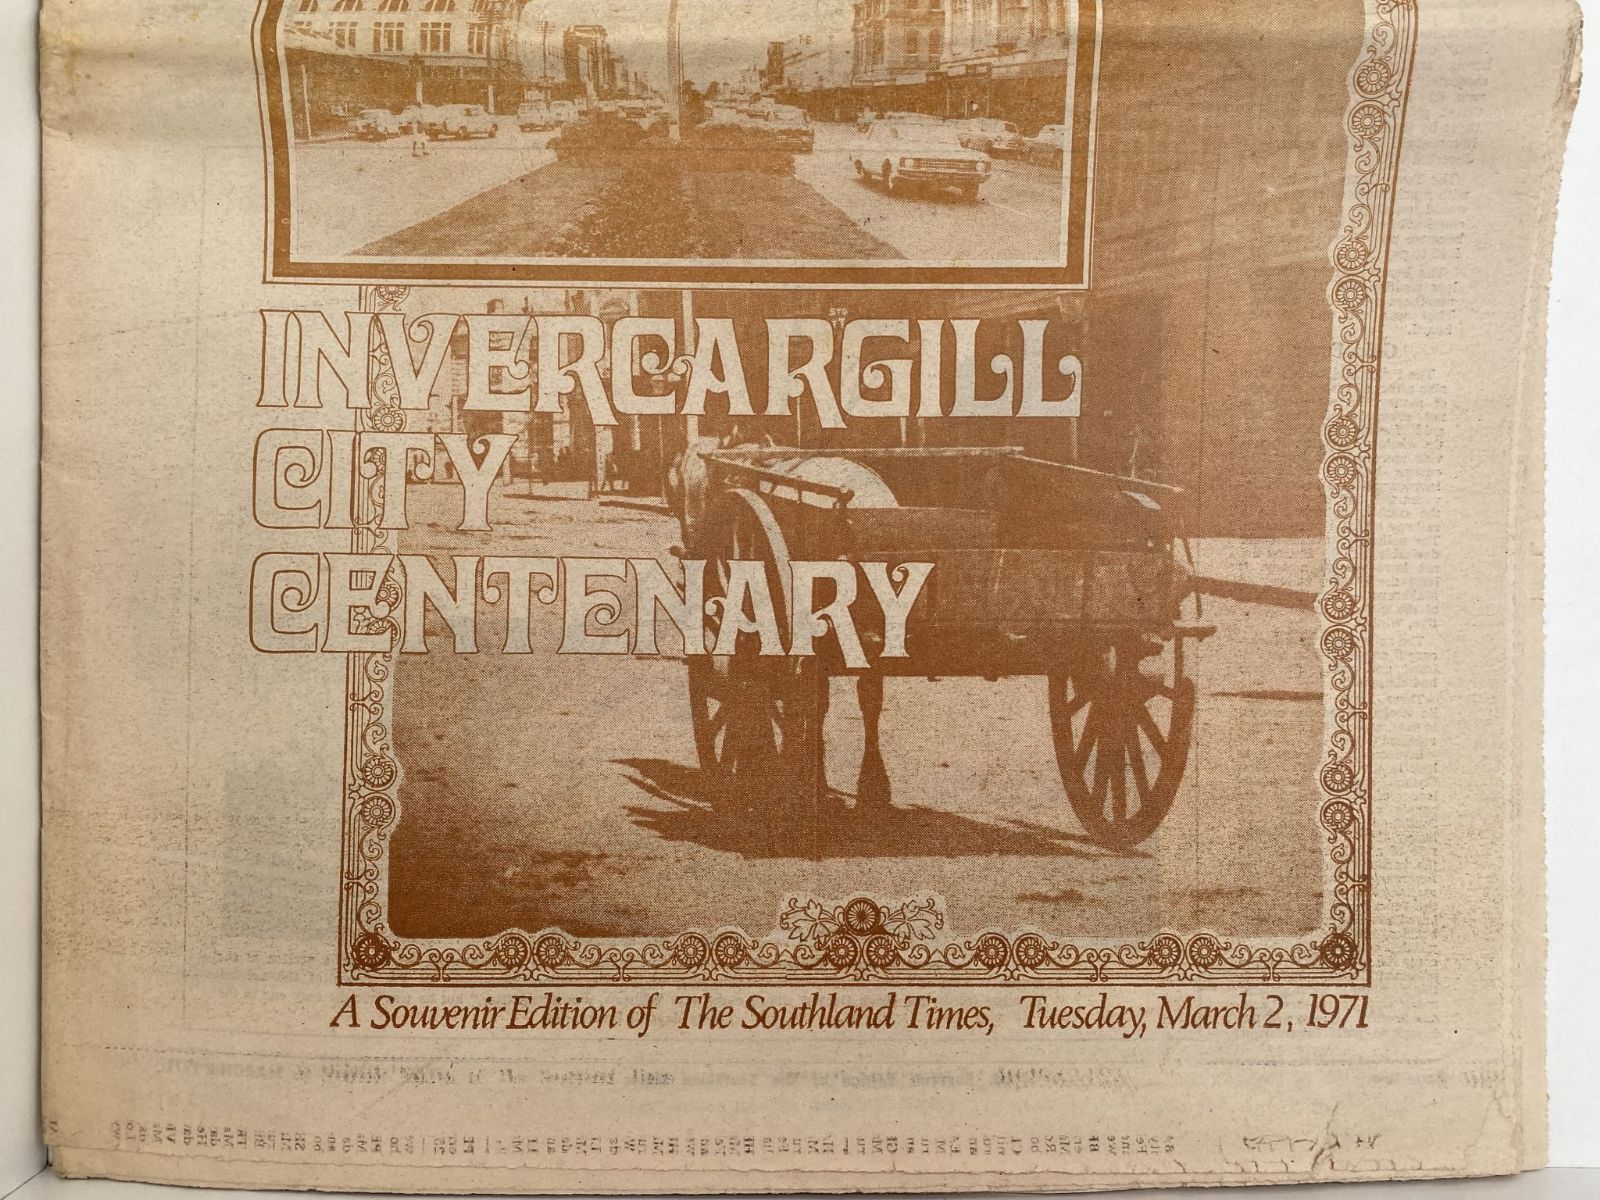 OLD NEWSPAPER: The Southland Times, 2 March 1971 - Invercargill City Centenary